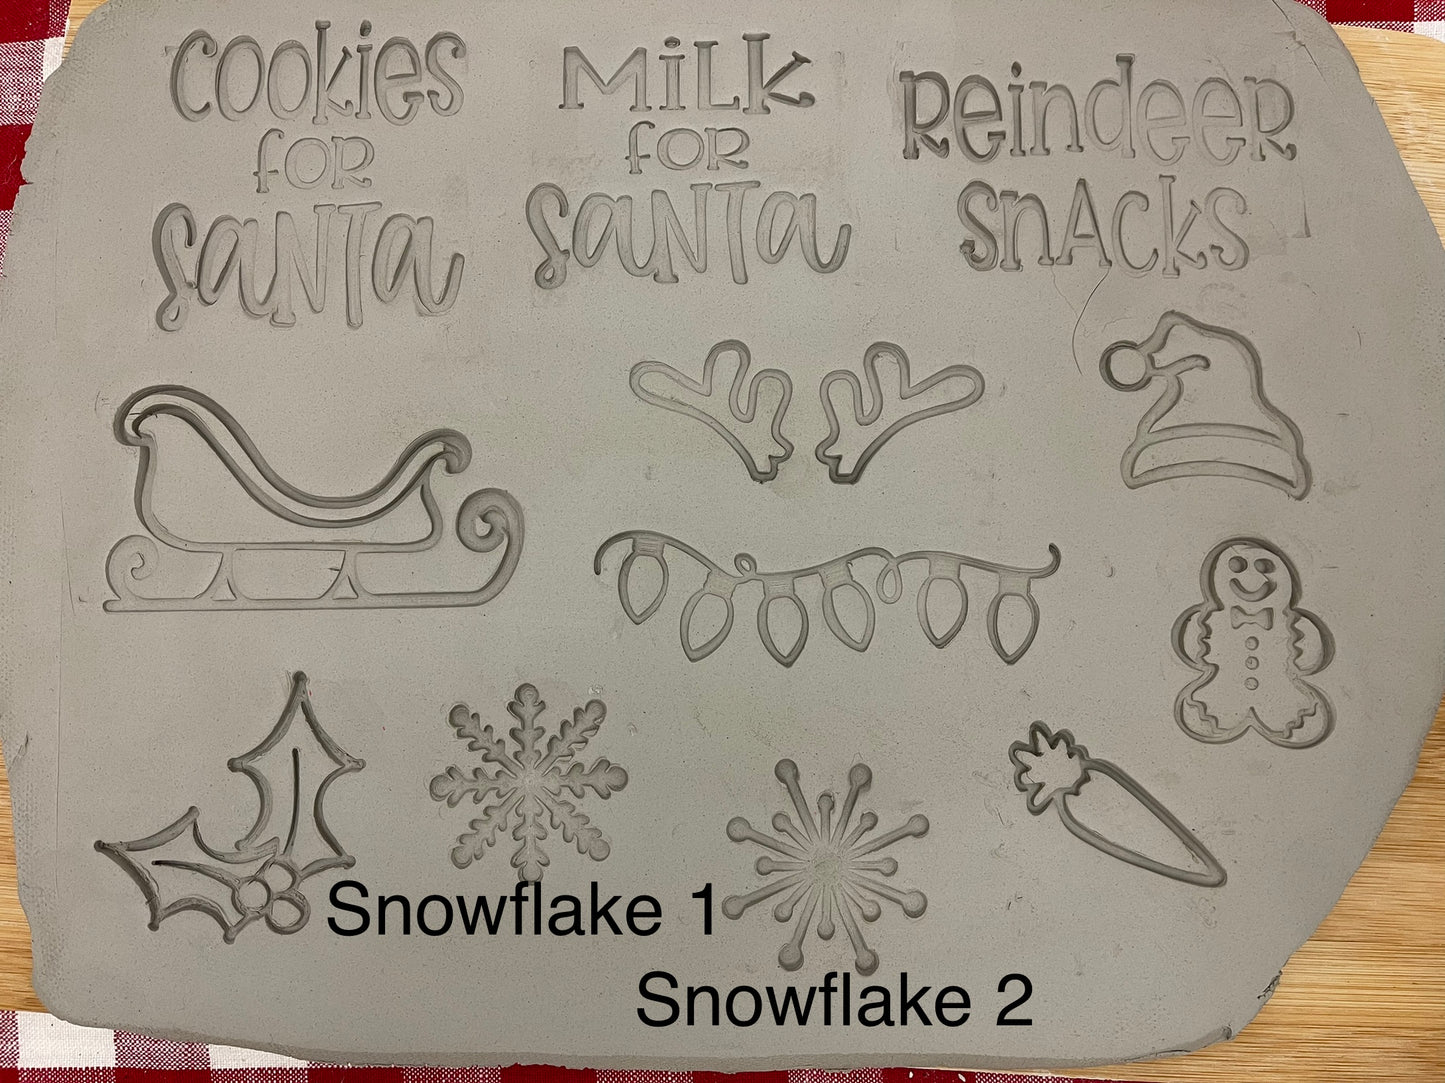 Pottery Stamp, Christmas Cookies for Santa designs, Each or Set - multiple sizes